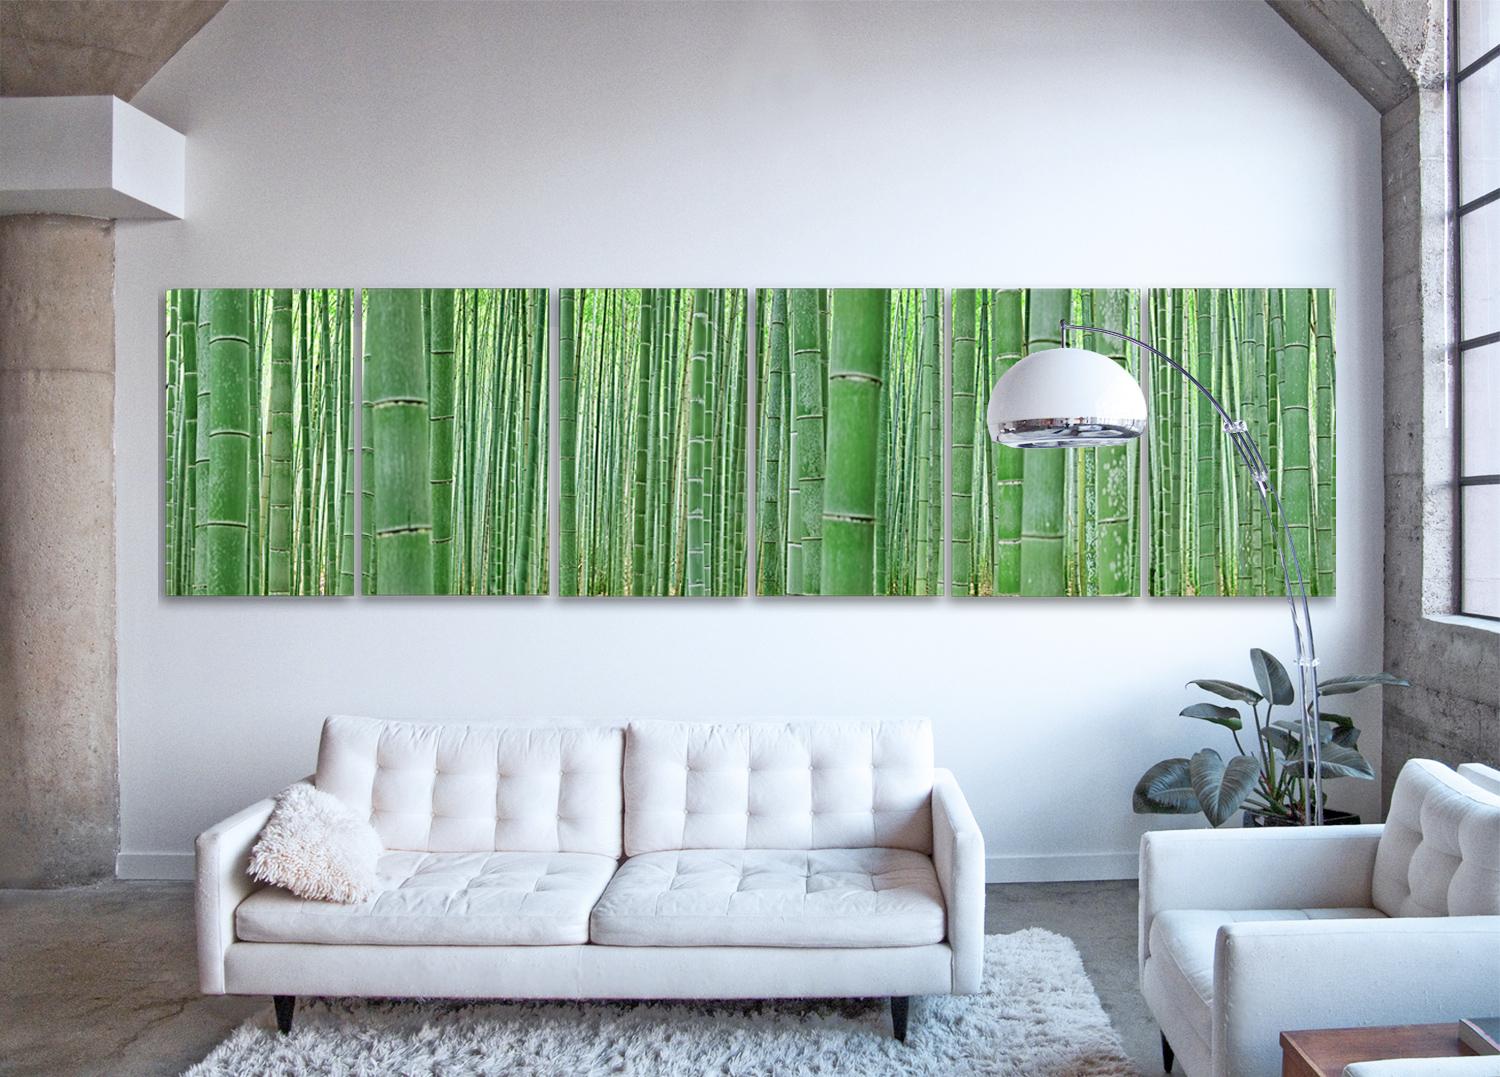 Bamboo Forest (6 glass panels) - abstract observation of iconic Japanese grove  - Print by Erik Pawassar